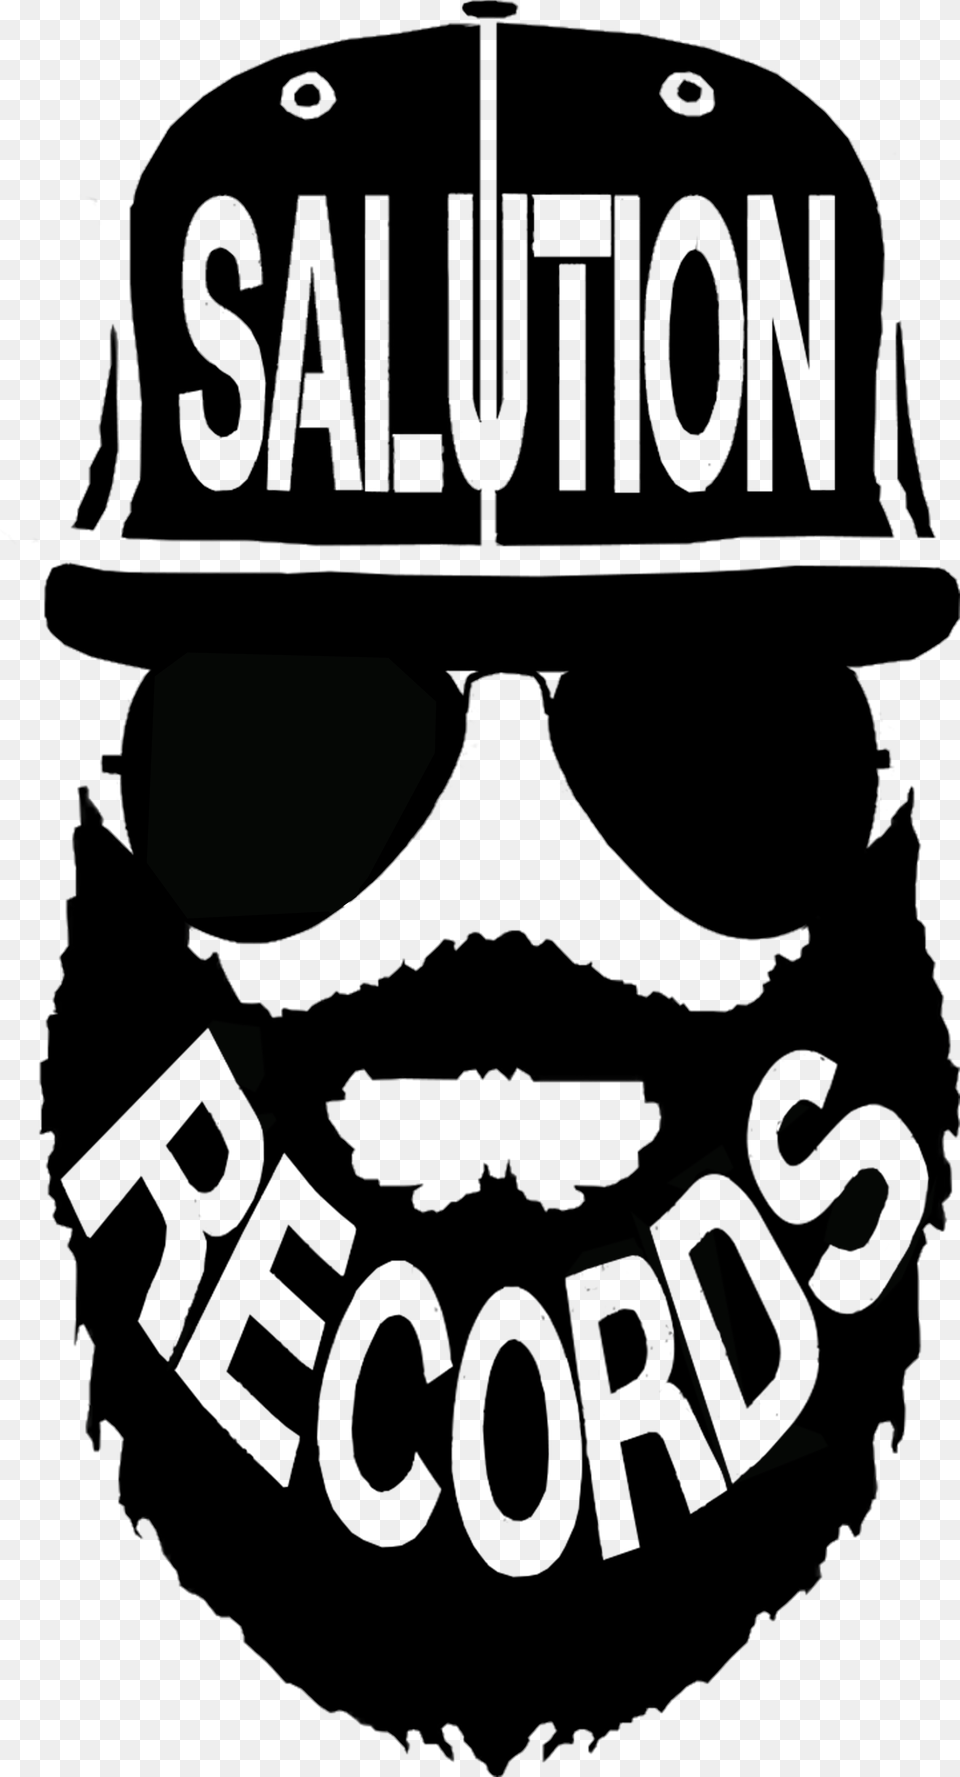 Big Official Bearded Logo Salution Records 2k16 Photography, Face, Head, Person, Blackboard Png Image